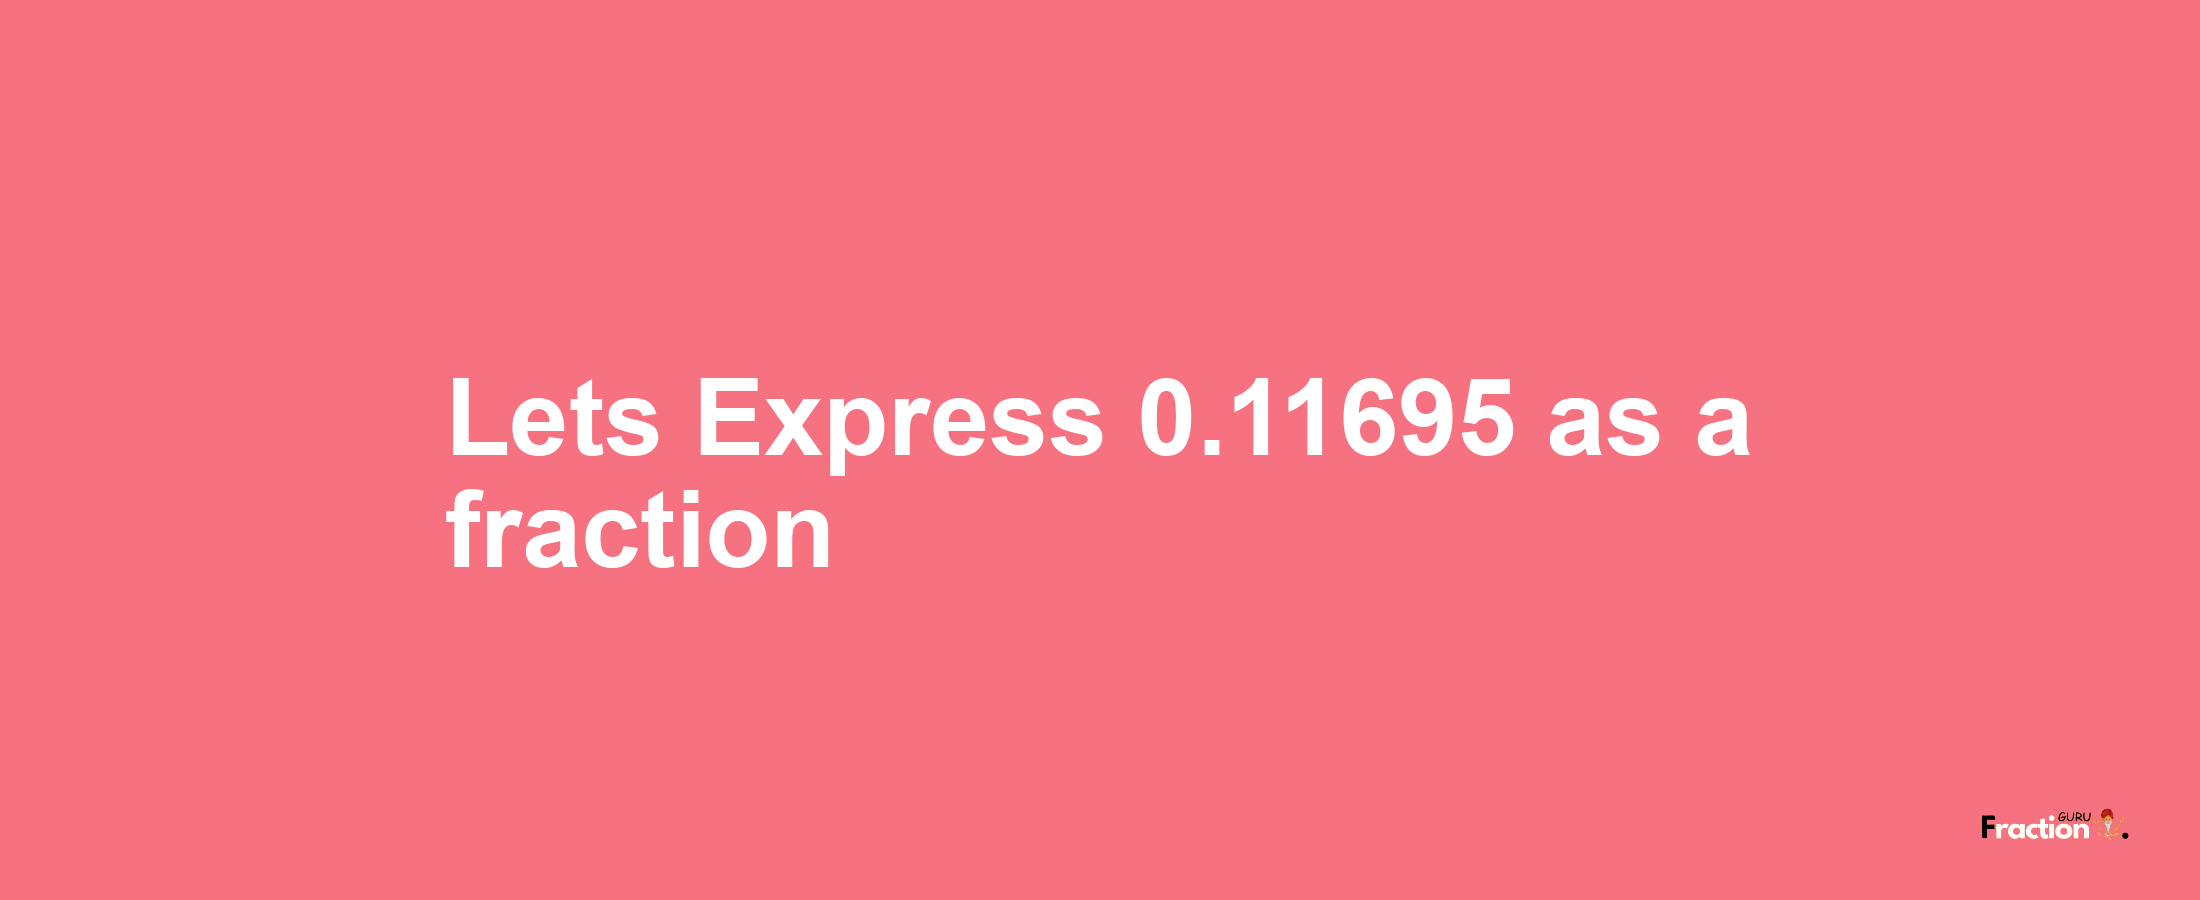 Lets Express 0.11695 as afraction